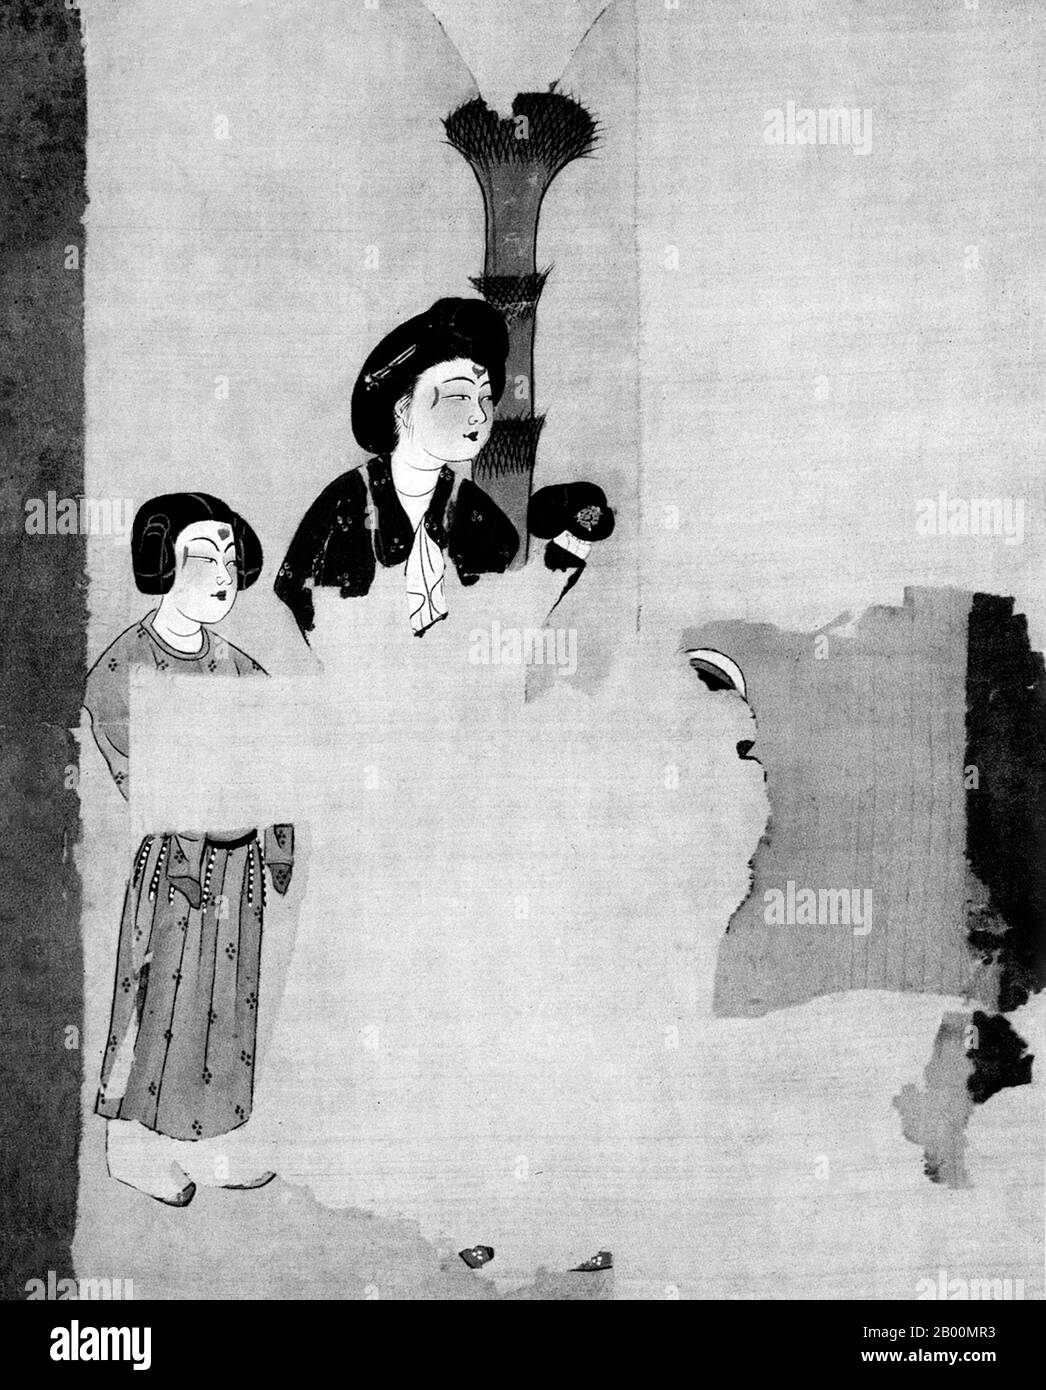 China: Part of a silk painting showing a lady and her page, from Astana Cemetery, Turfan, Xinjiang.  The Astana Graves are a series of underground tombs located 6km from the ancient city of Gaochang, and 42km from Turpan, in Xinjiang, China. The tombs were used by the inhabitants of Gaochang, both commoners and locals, for about 600 years from 200 CE – 800 CE.  The complex covers 10 square kilometers and contains over 1,000 tombs. Different plots for separate castes and families are marked by gravel dividers. Due to the arid environment many important artifacts have been well preserved. Stock Photo